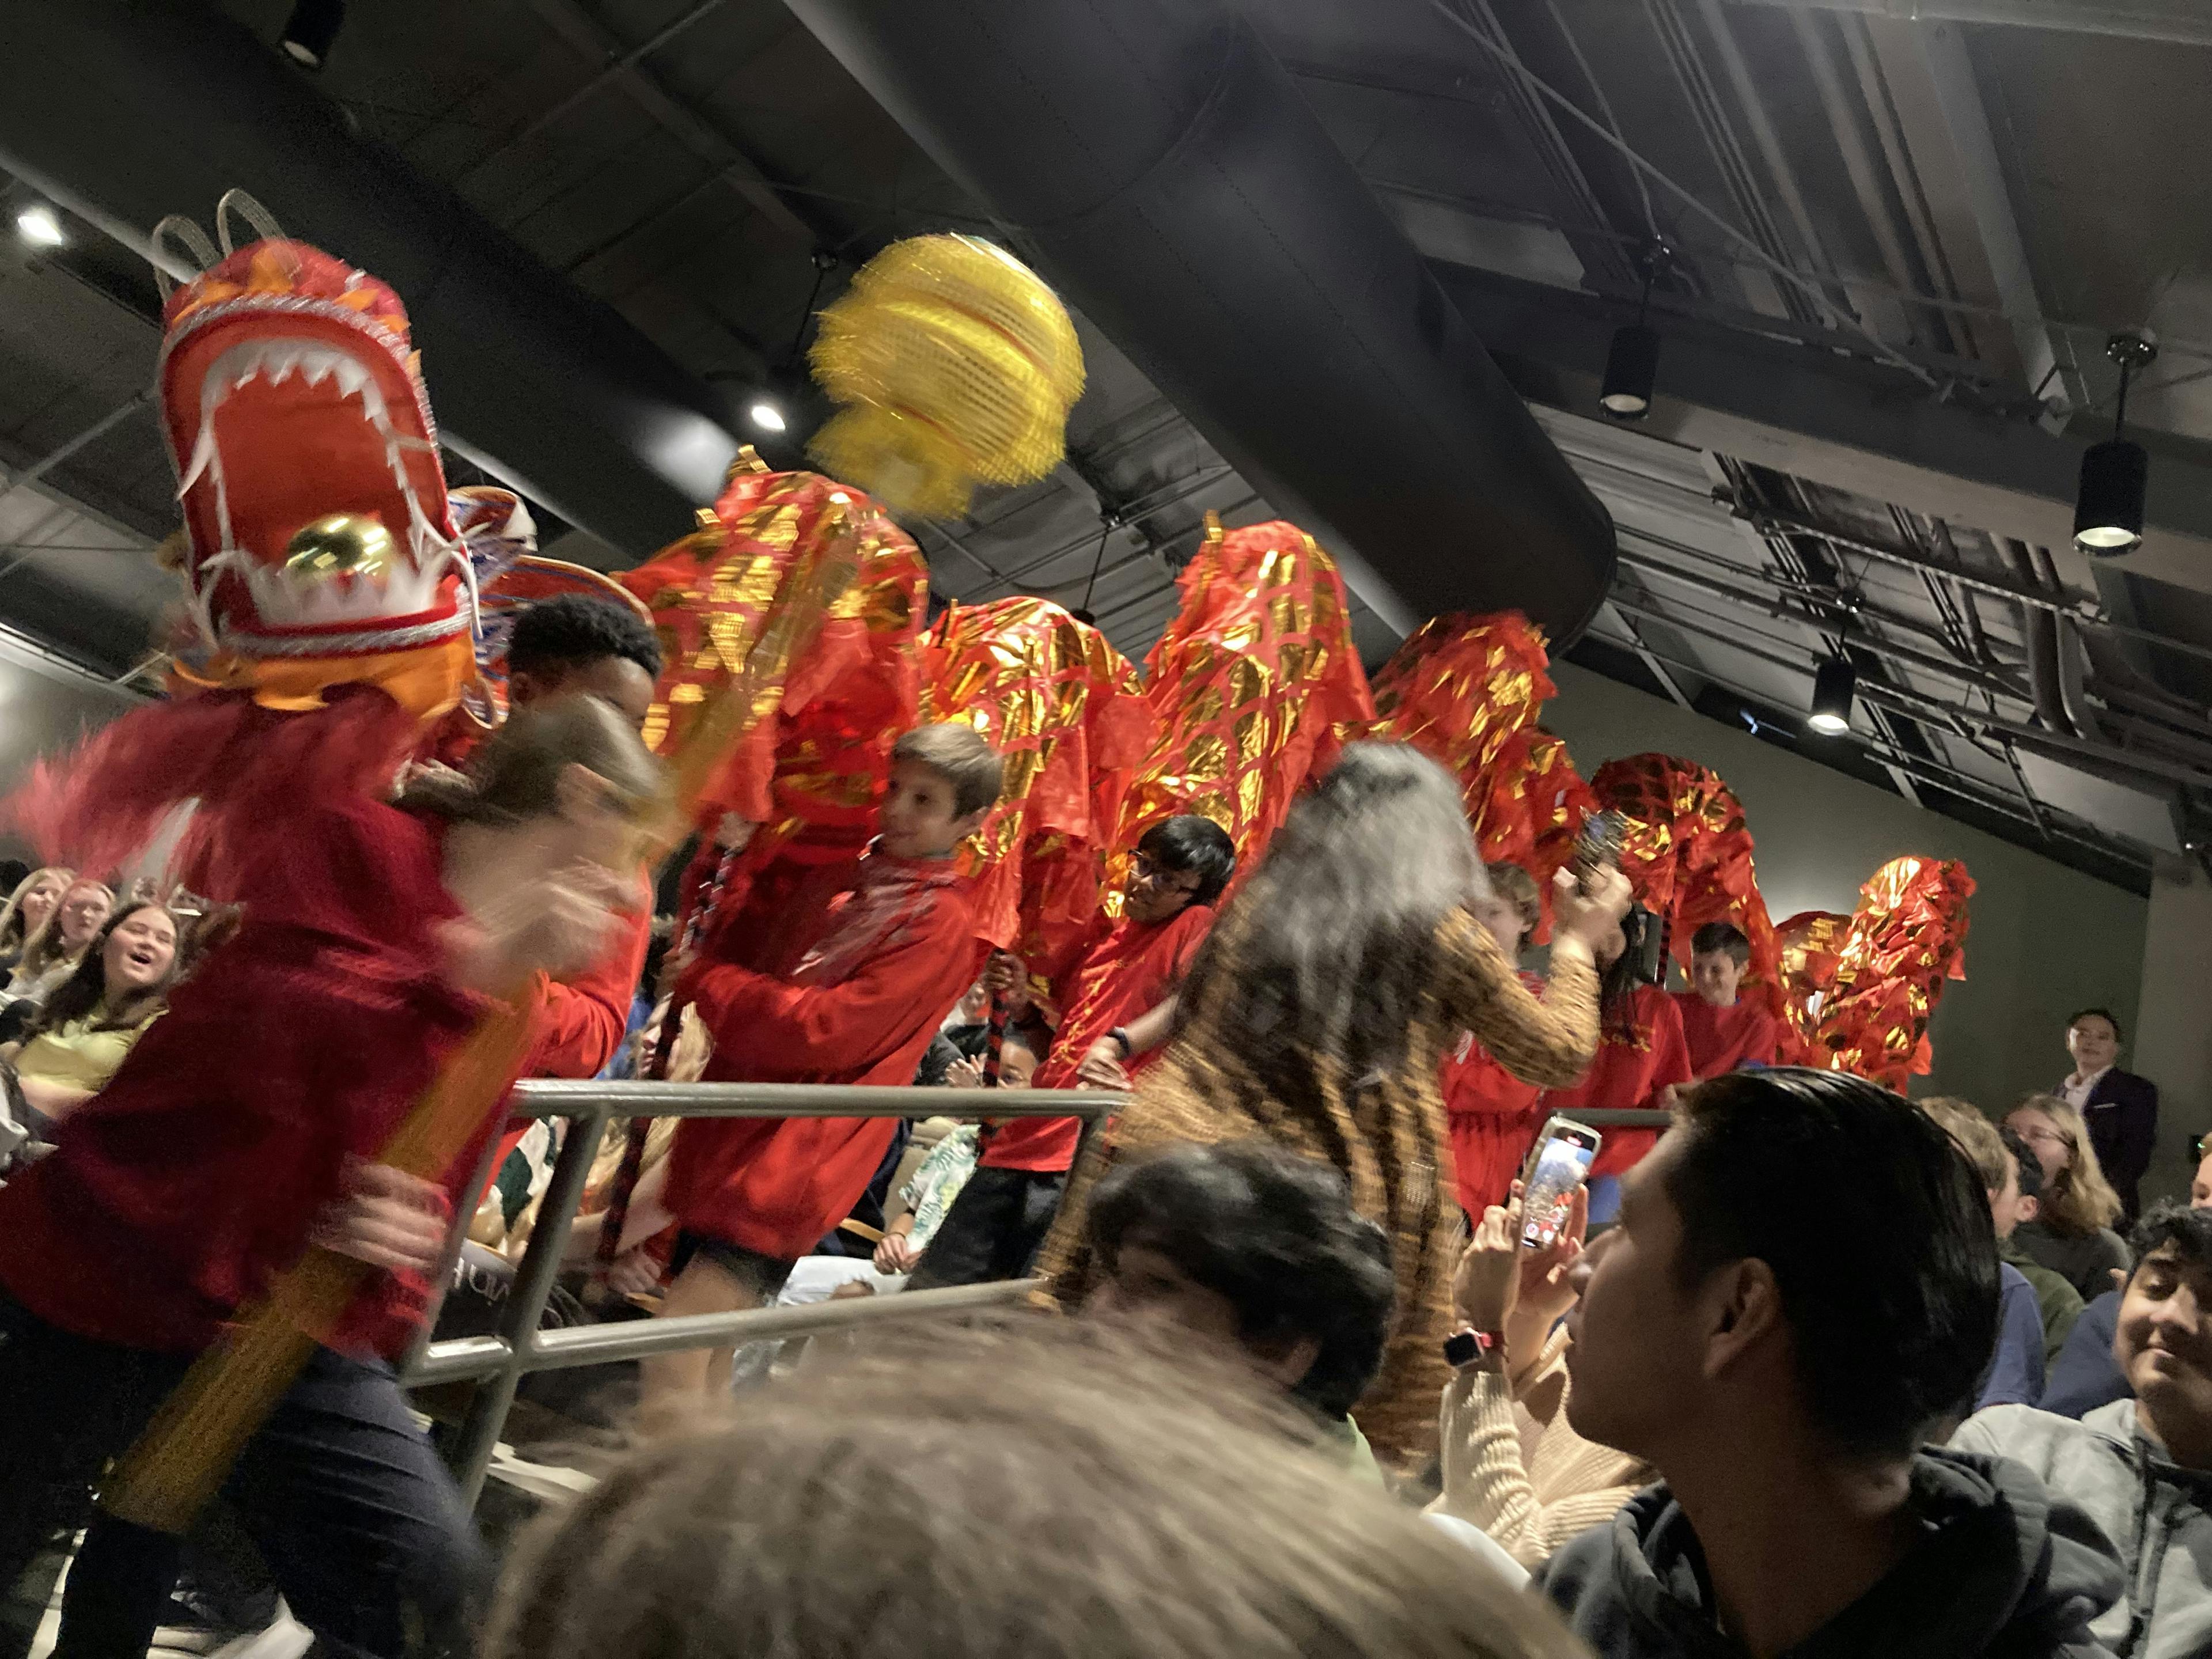 Knight Life, Vol. 3: Dragons, Dancing, and Chinese New Year